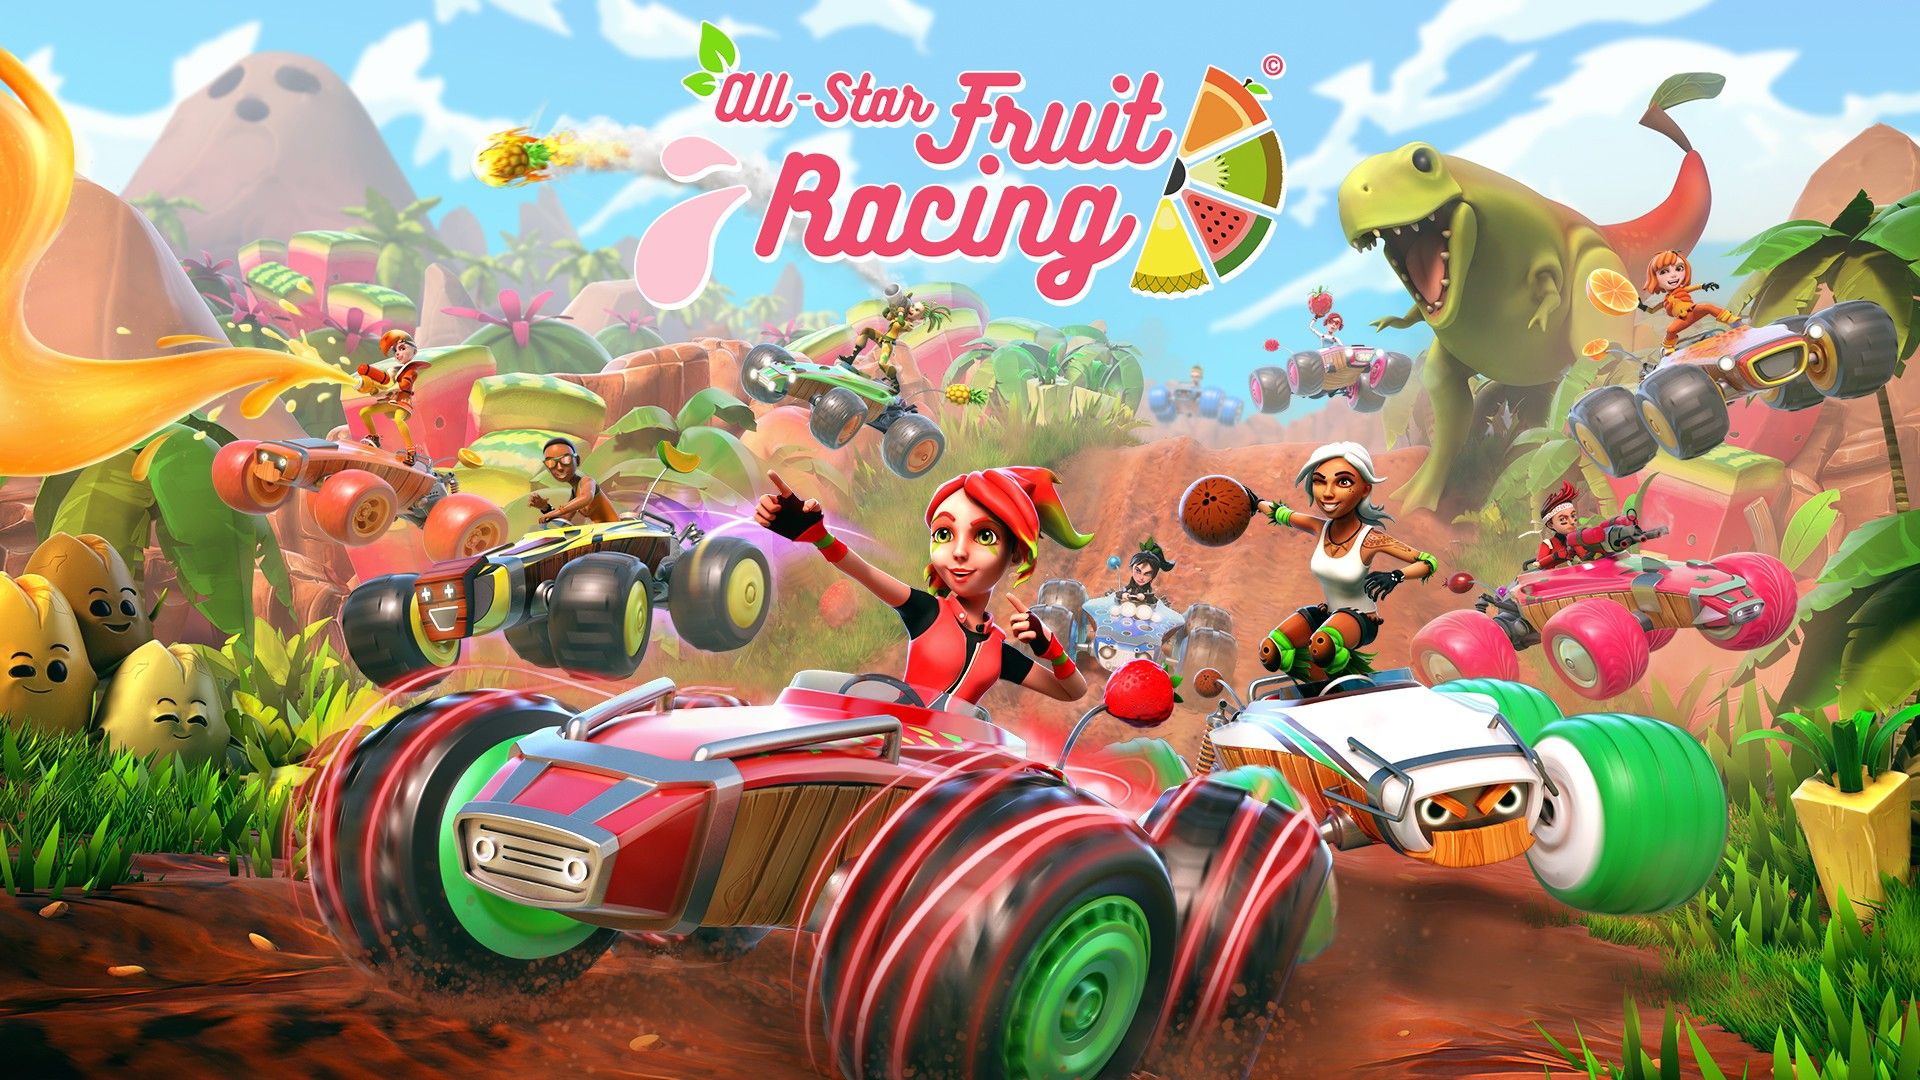 All-Star Fruit Racing key art showing colorful karts speeding along with a dinosaur-like monster in the background.